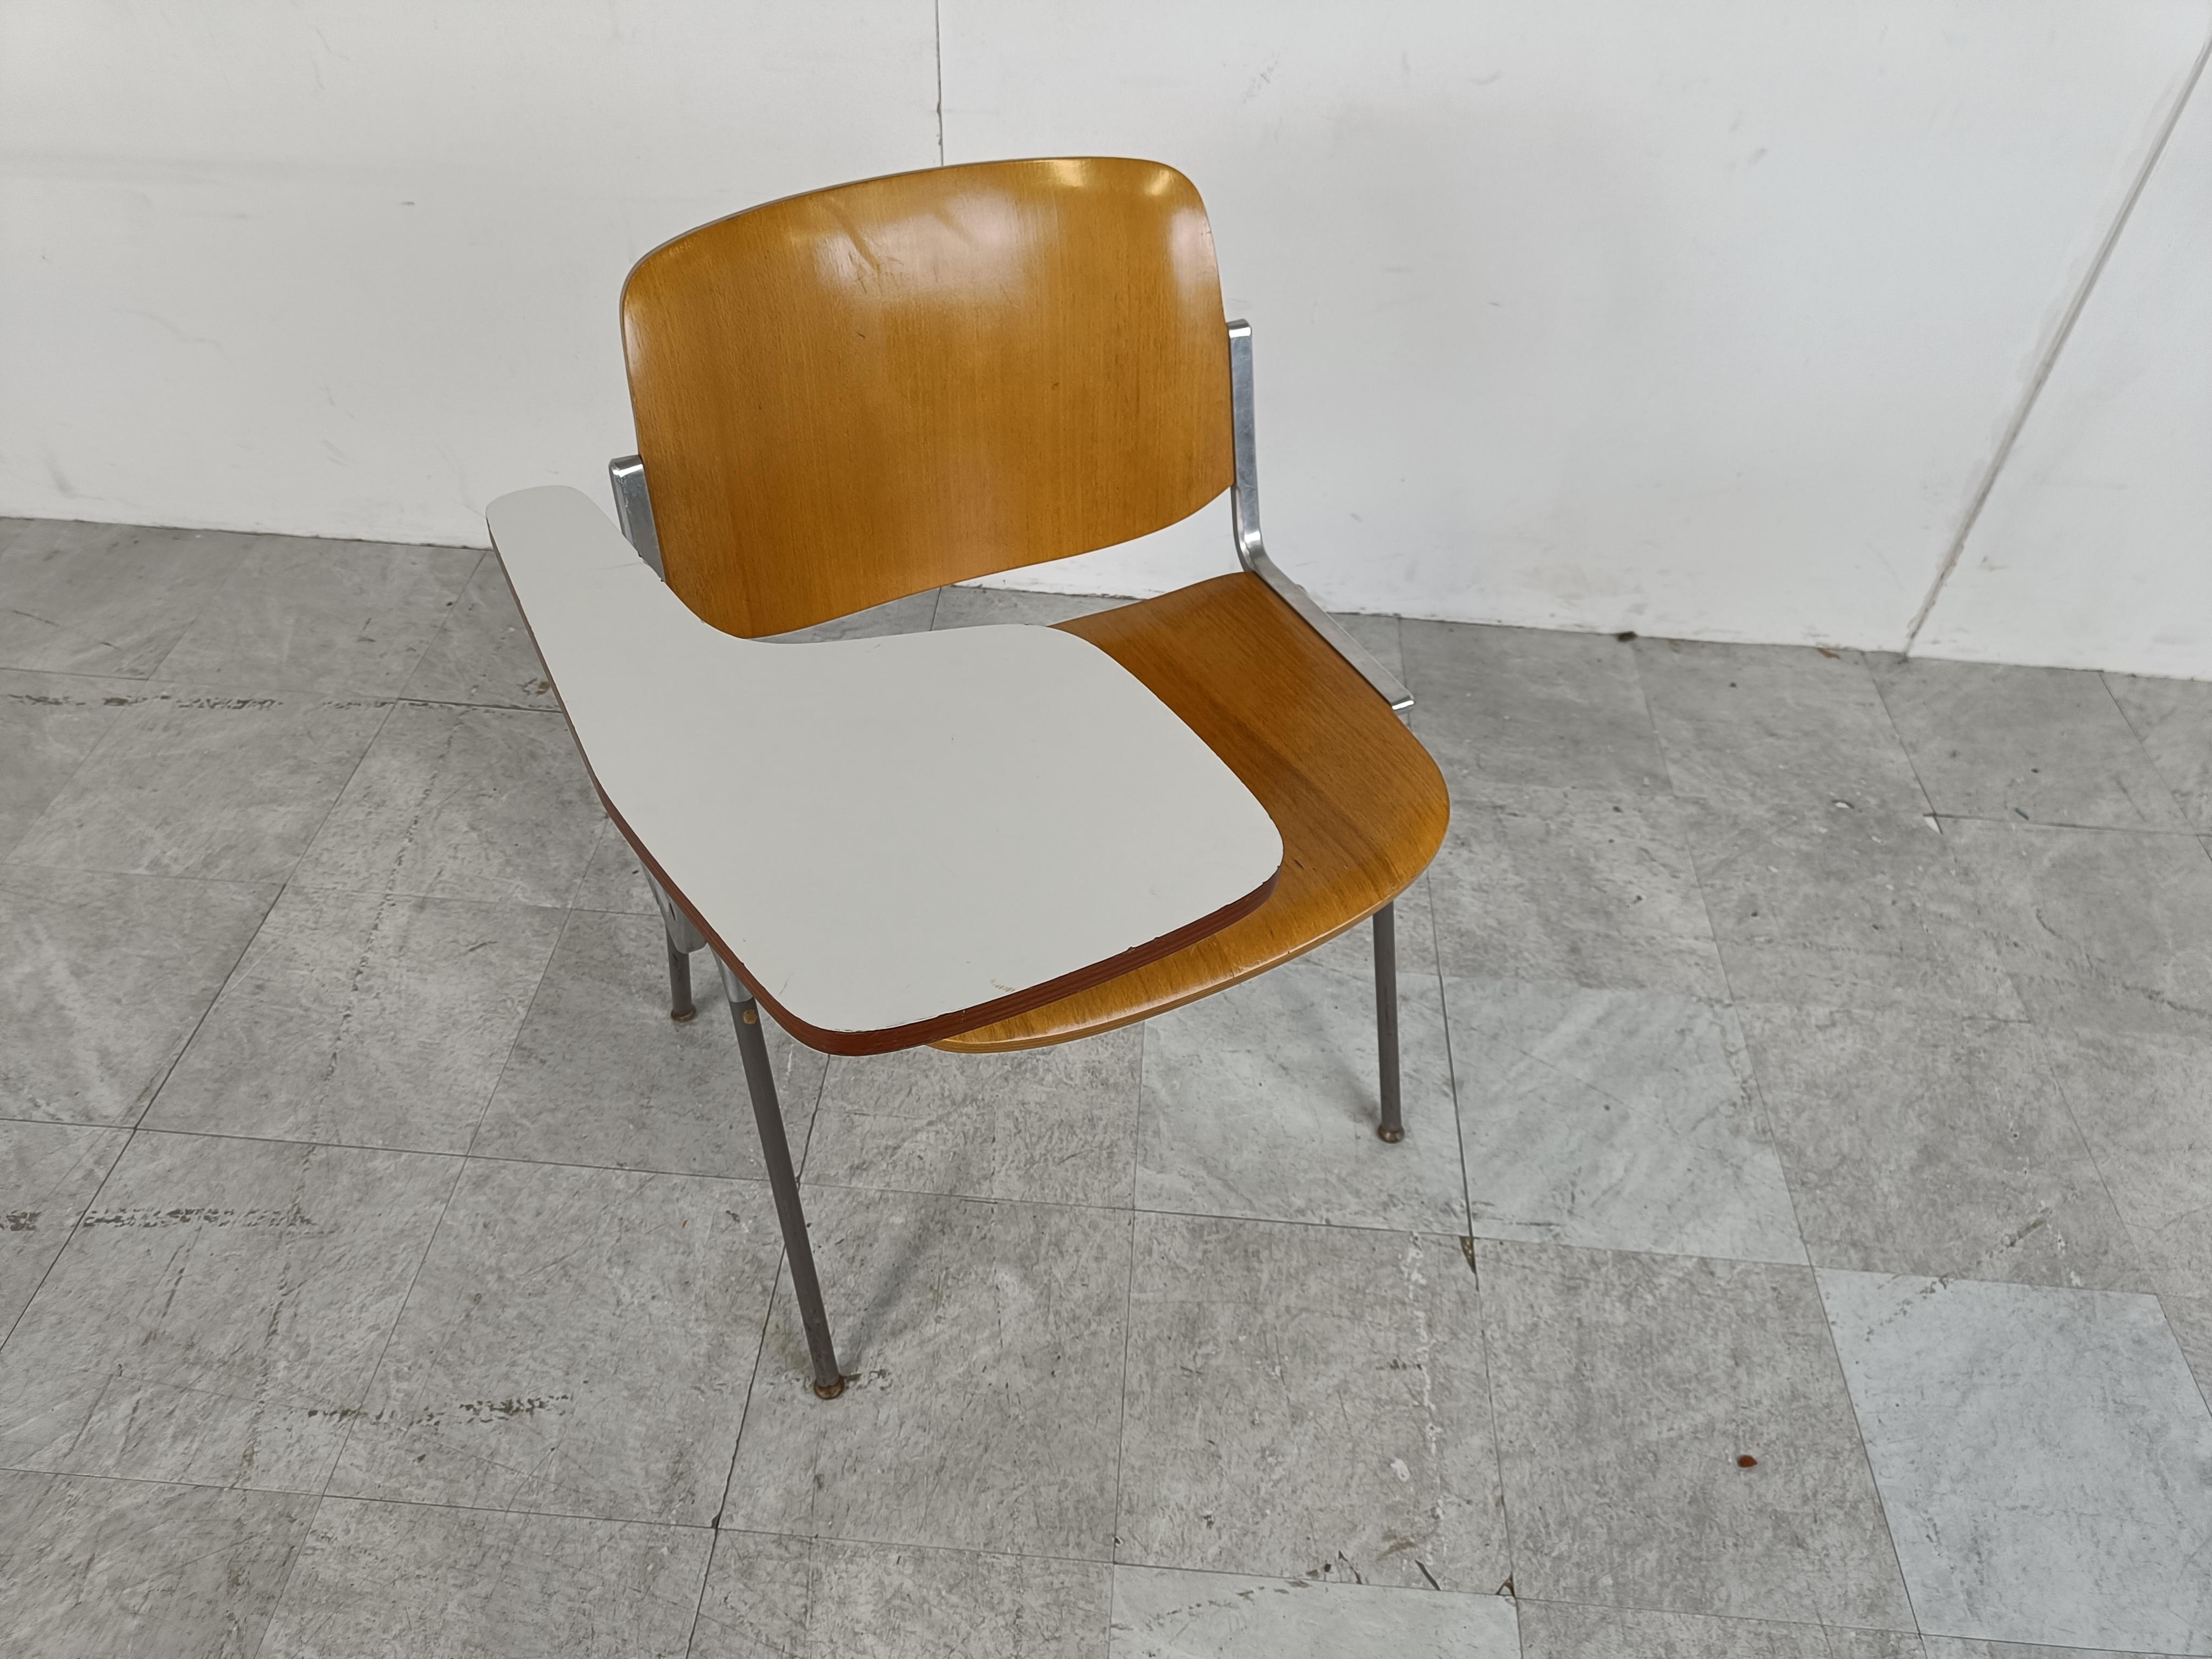 Vintage DSC 106 chair with foldable table designed by Giancarlo Piretti for Castelli.

Rare model with folding table.

Good condition

1970s - Italy

Dimensions:
Height: 78cm/30.70